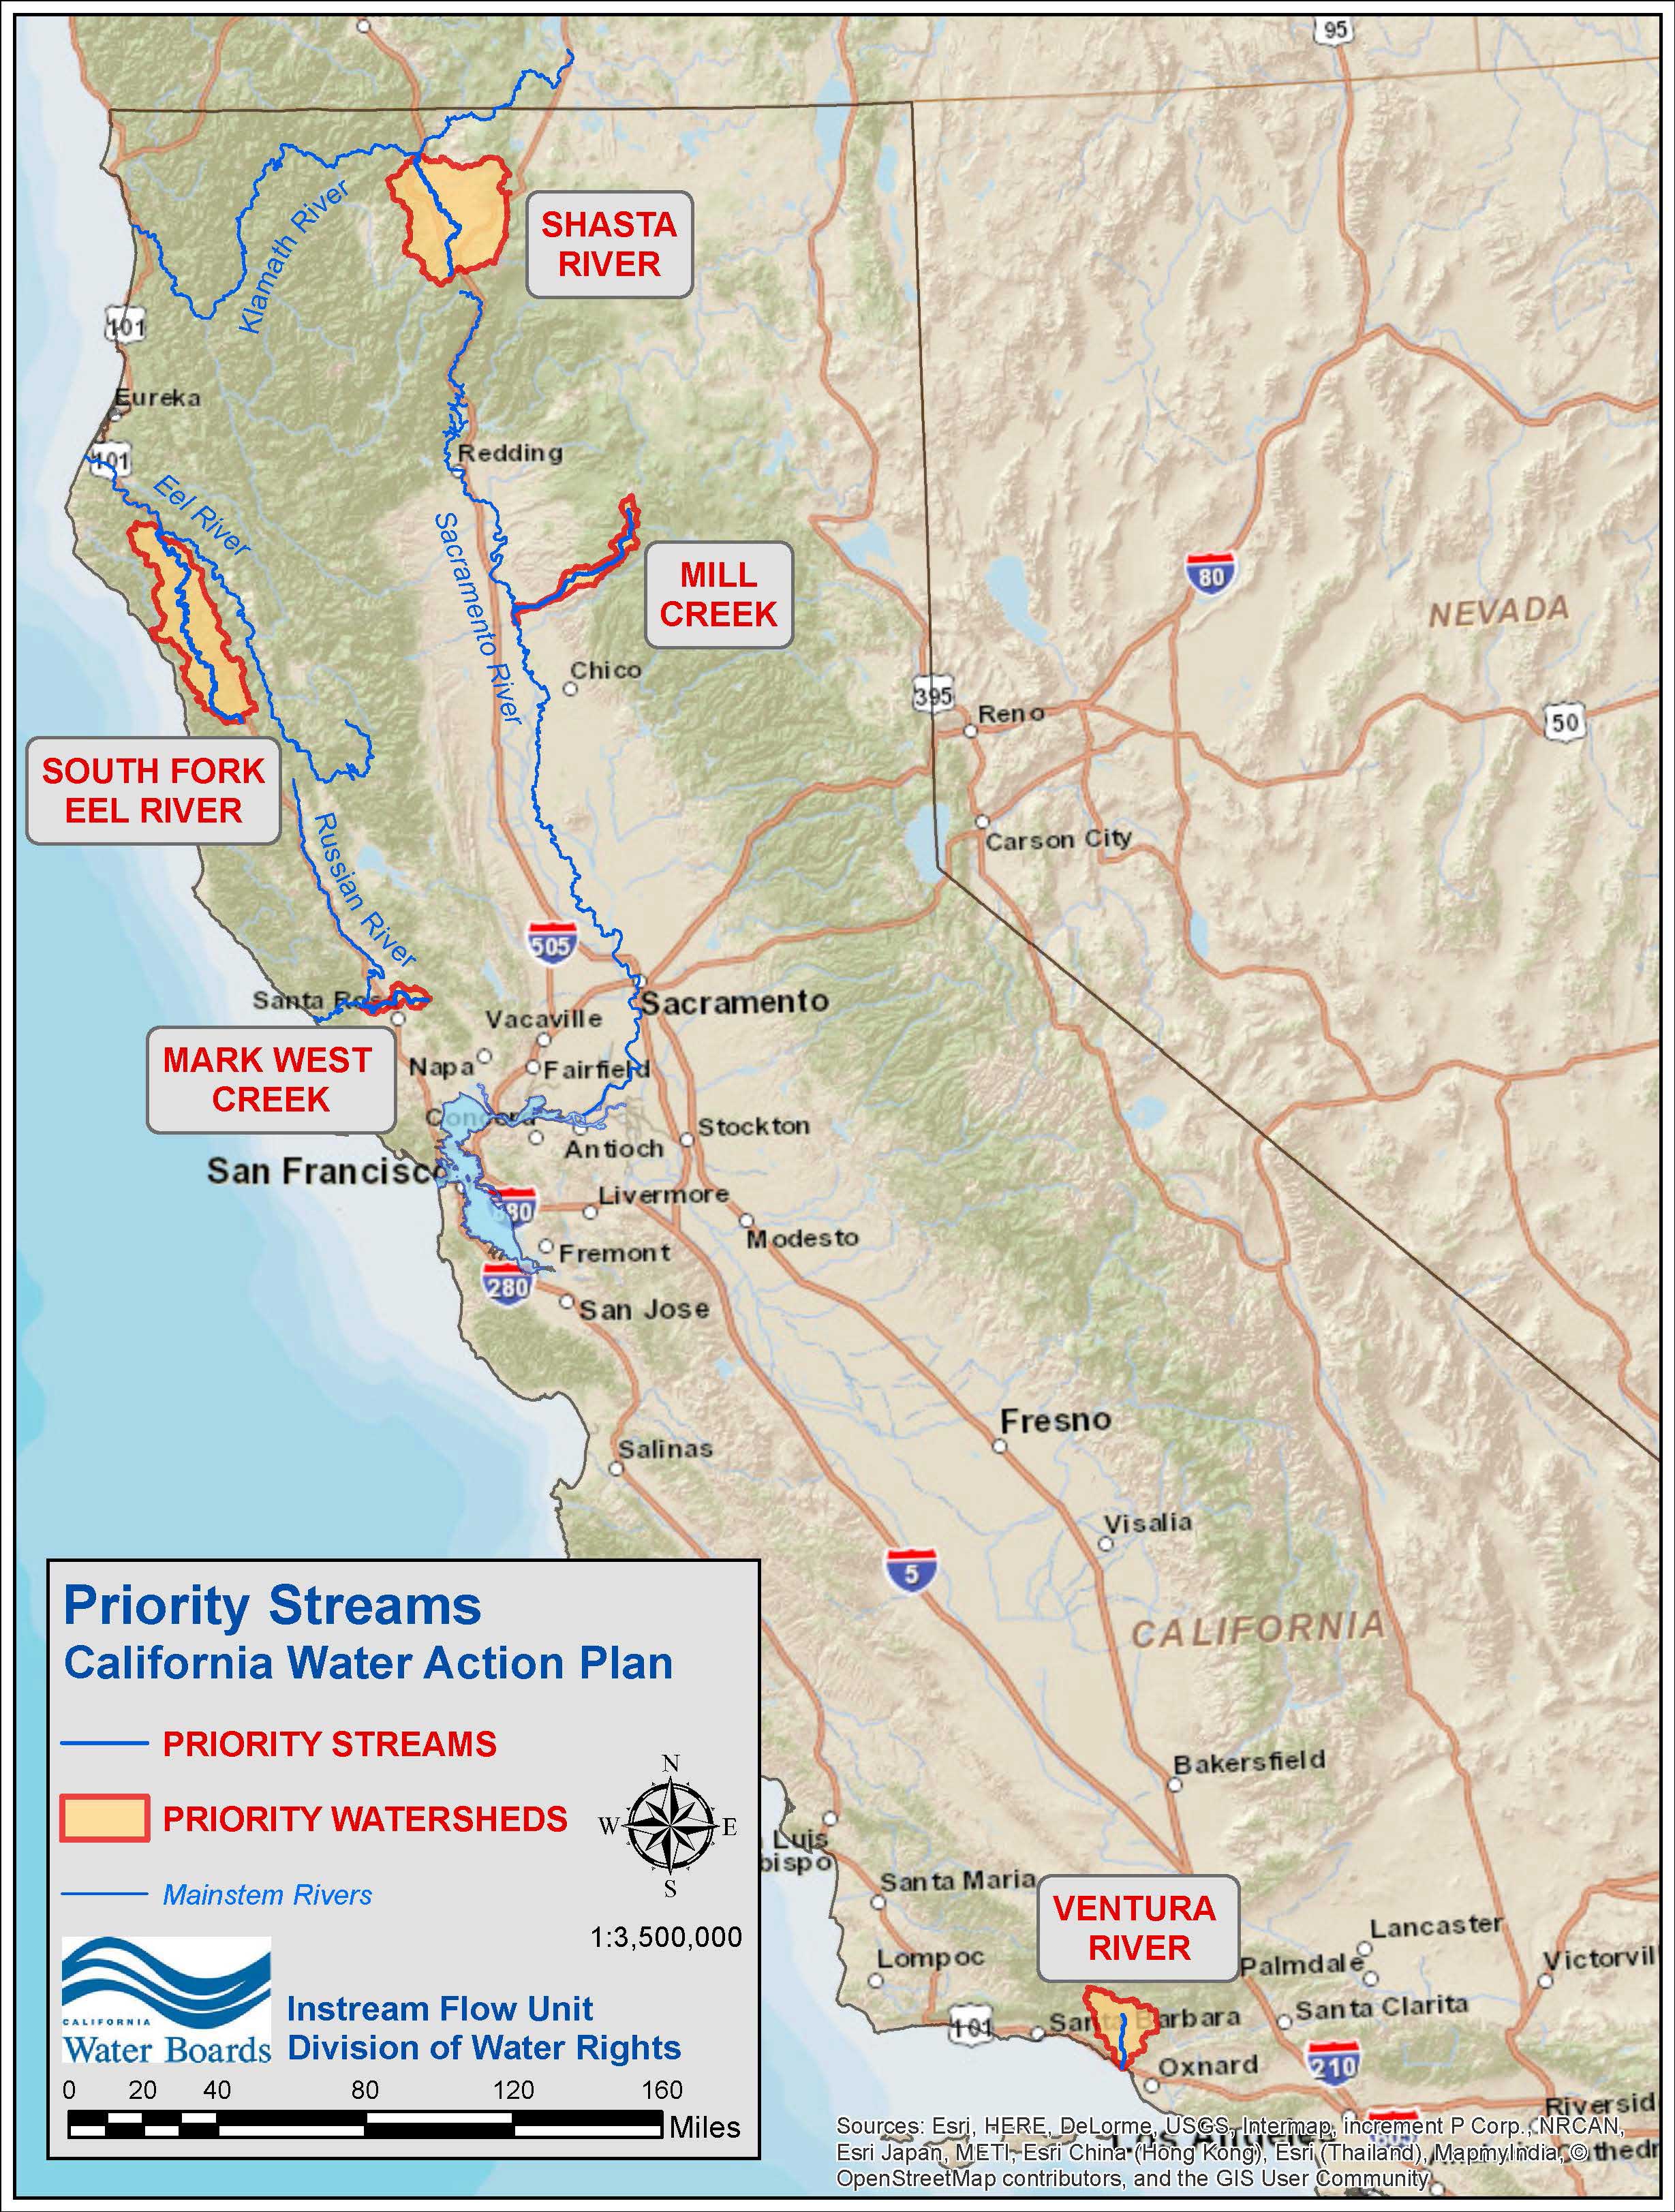 Topographic map of California showing the locations of the five priority watersheds that the State Water Resources Control Board and California Department of Fish and Wildlife have identified as a starting point for the California Water Action Plan effort. From north to south, the streams are the Shasta River, tributary to the Klamath River; Mill Creek, tributary to the Sacramento River; the South Fork Eel River; Mark West Creek, tributary to the Russian River, and the Ventura River.